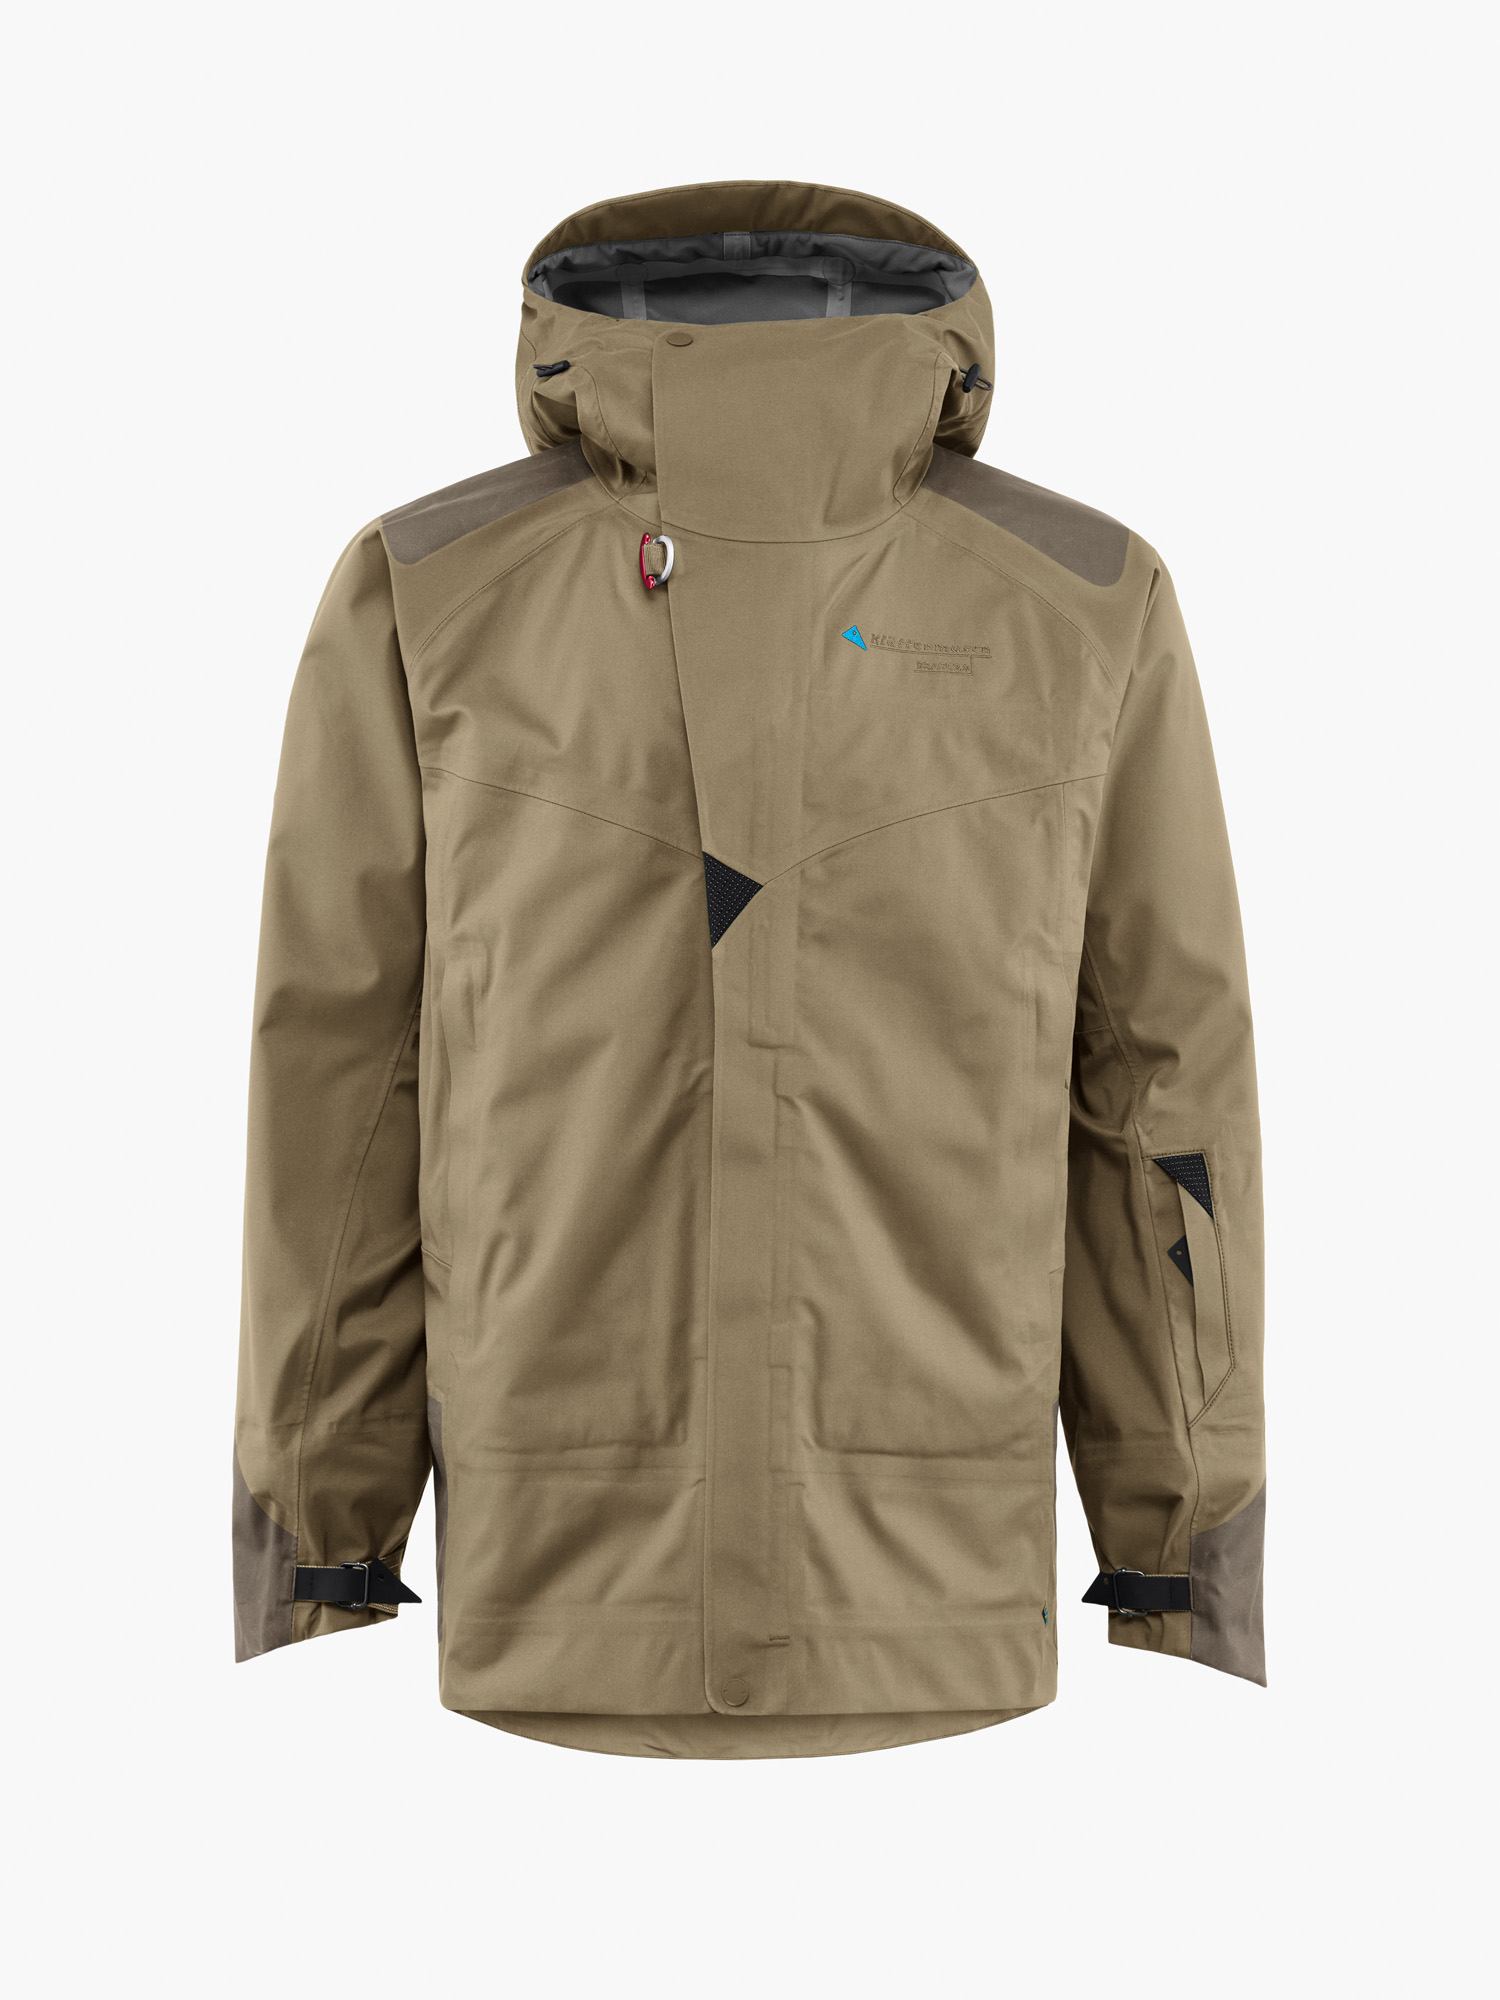 Stretchy and flexible men's shell jacket in beige, light brown color with hood.